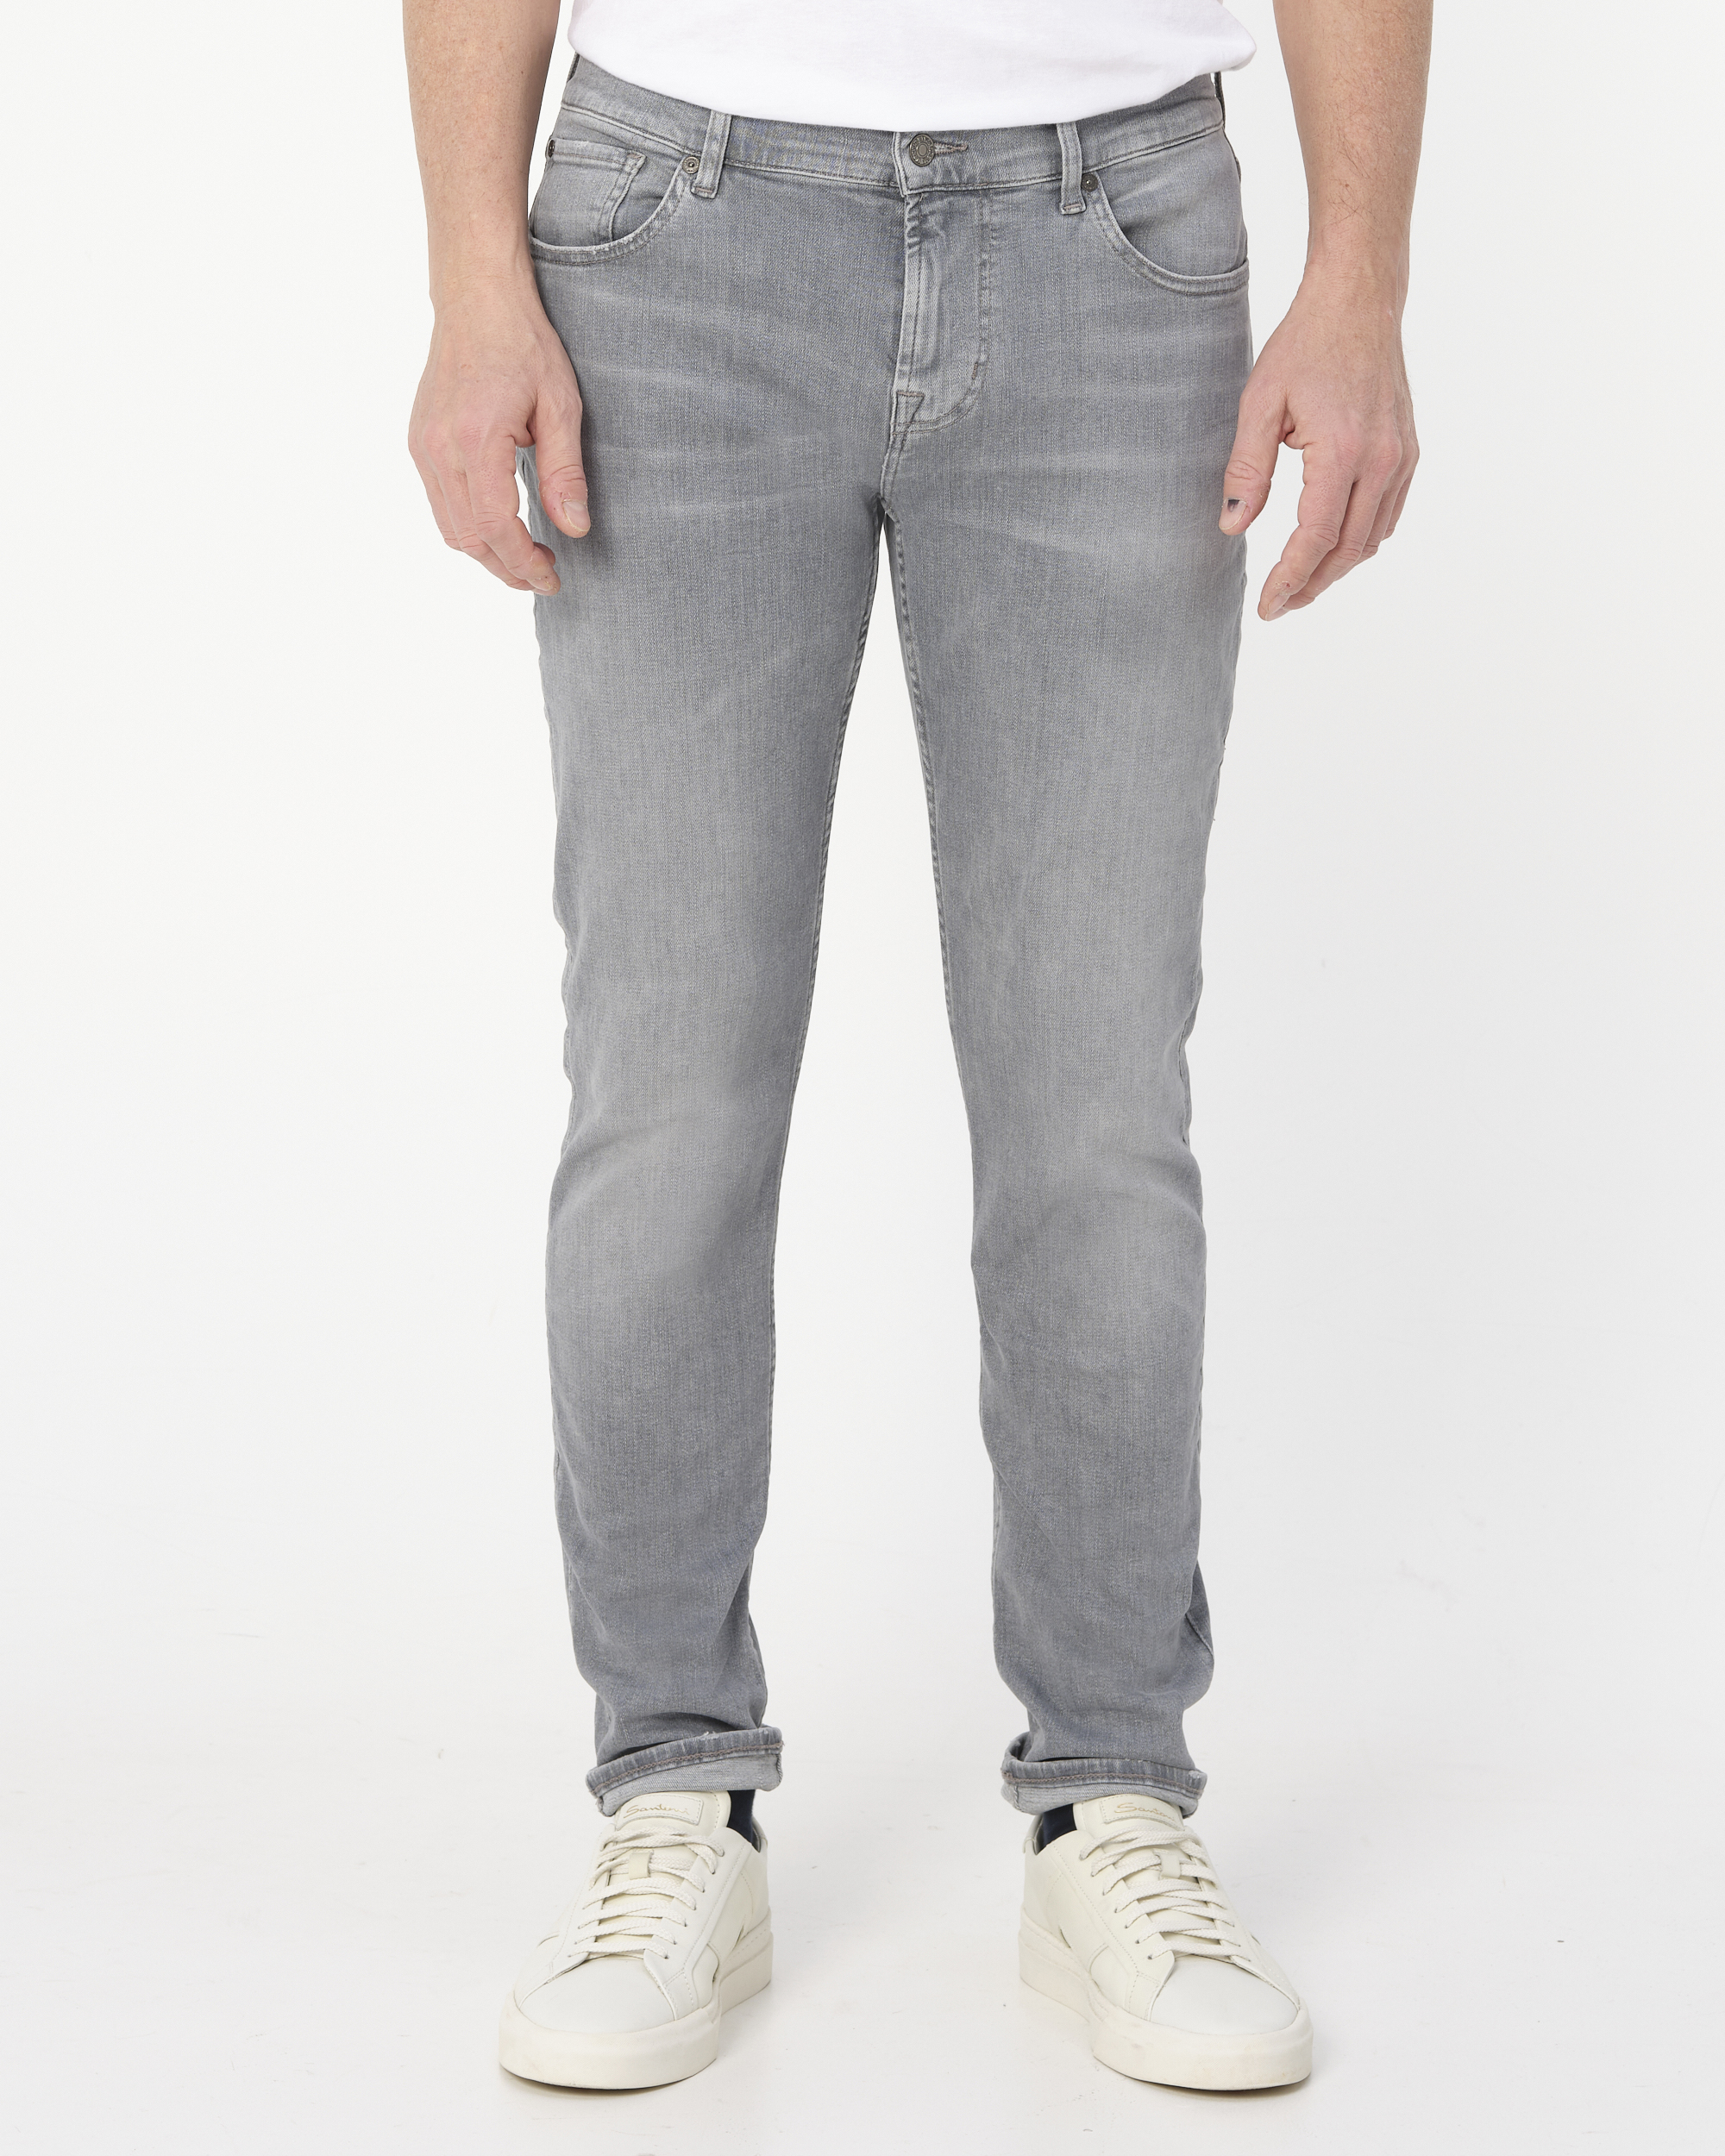 Afbeelding van 7 For All Mankind Jeans